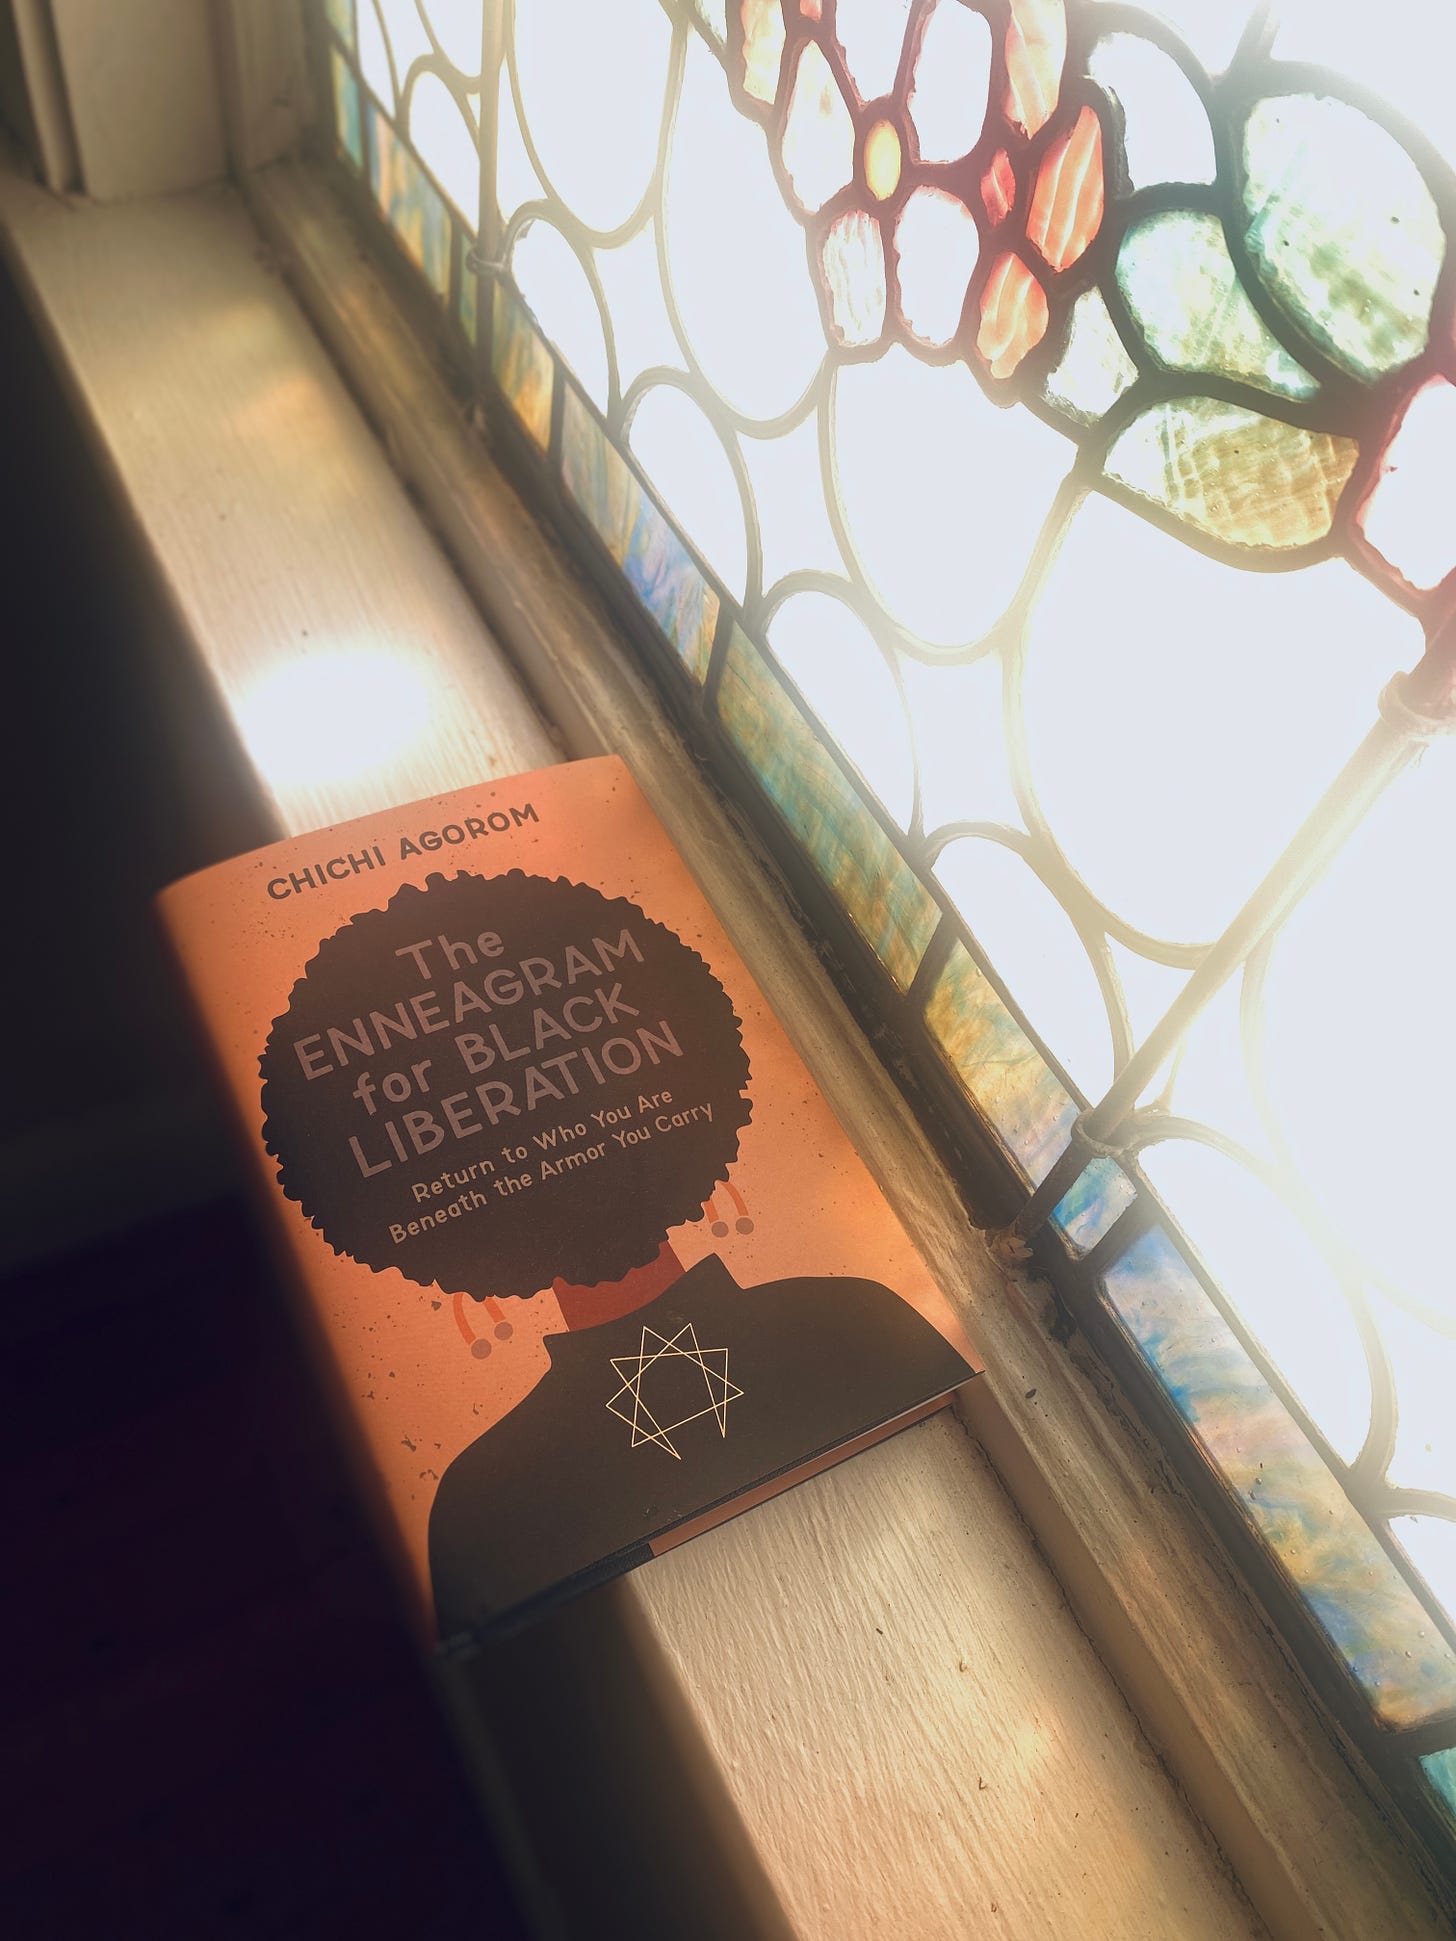 A copy of the Enneagram for black liberation. Sitting on a windowsill, the window I stain glass with light pouring through. Some of the pink Stainglass matches the pink background the cover of the book, which has a graphic of a woman's Afro black shirt gram symbol on shirt in the title of the book in the Afro.